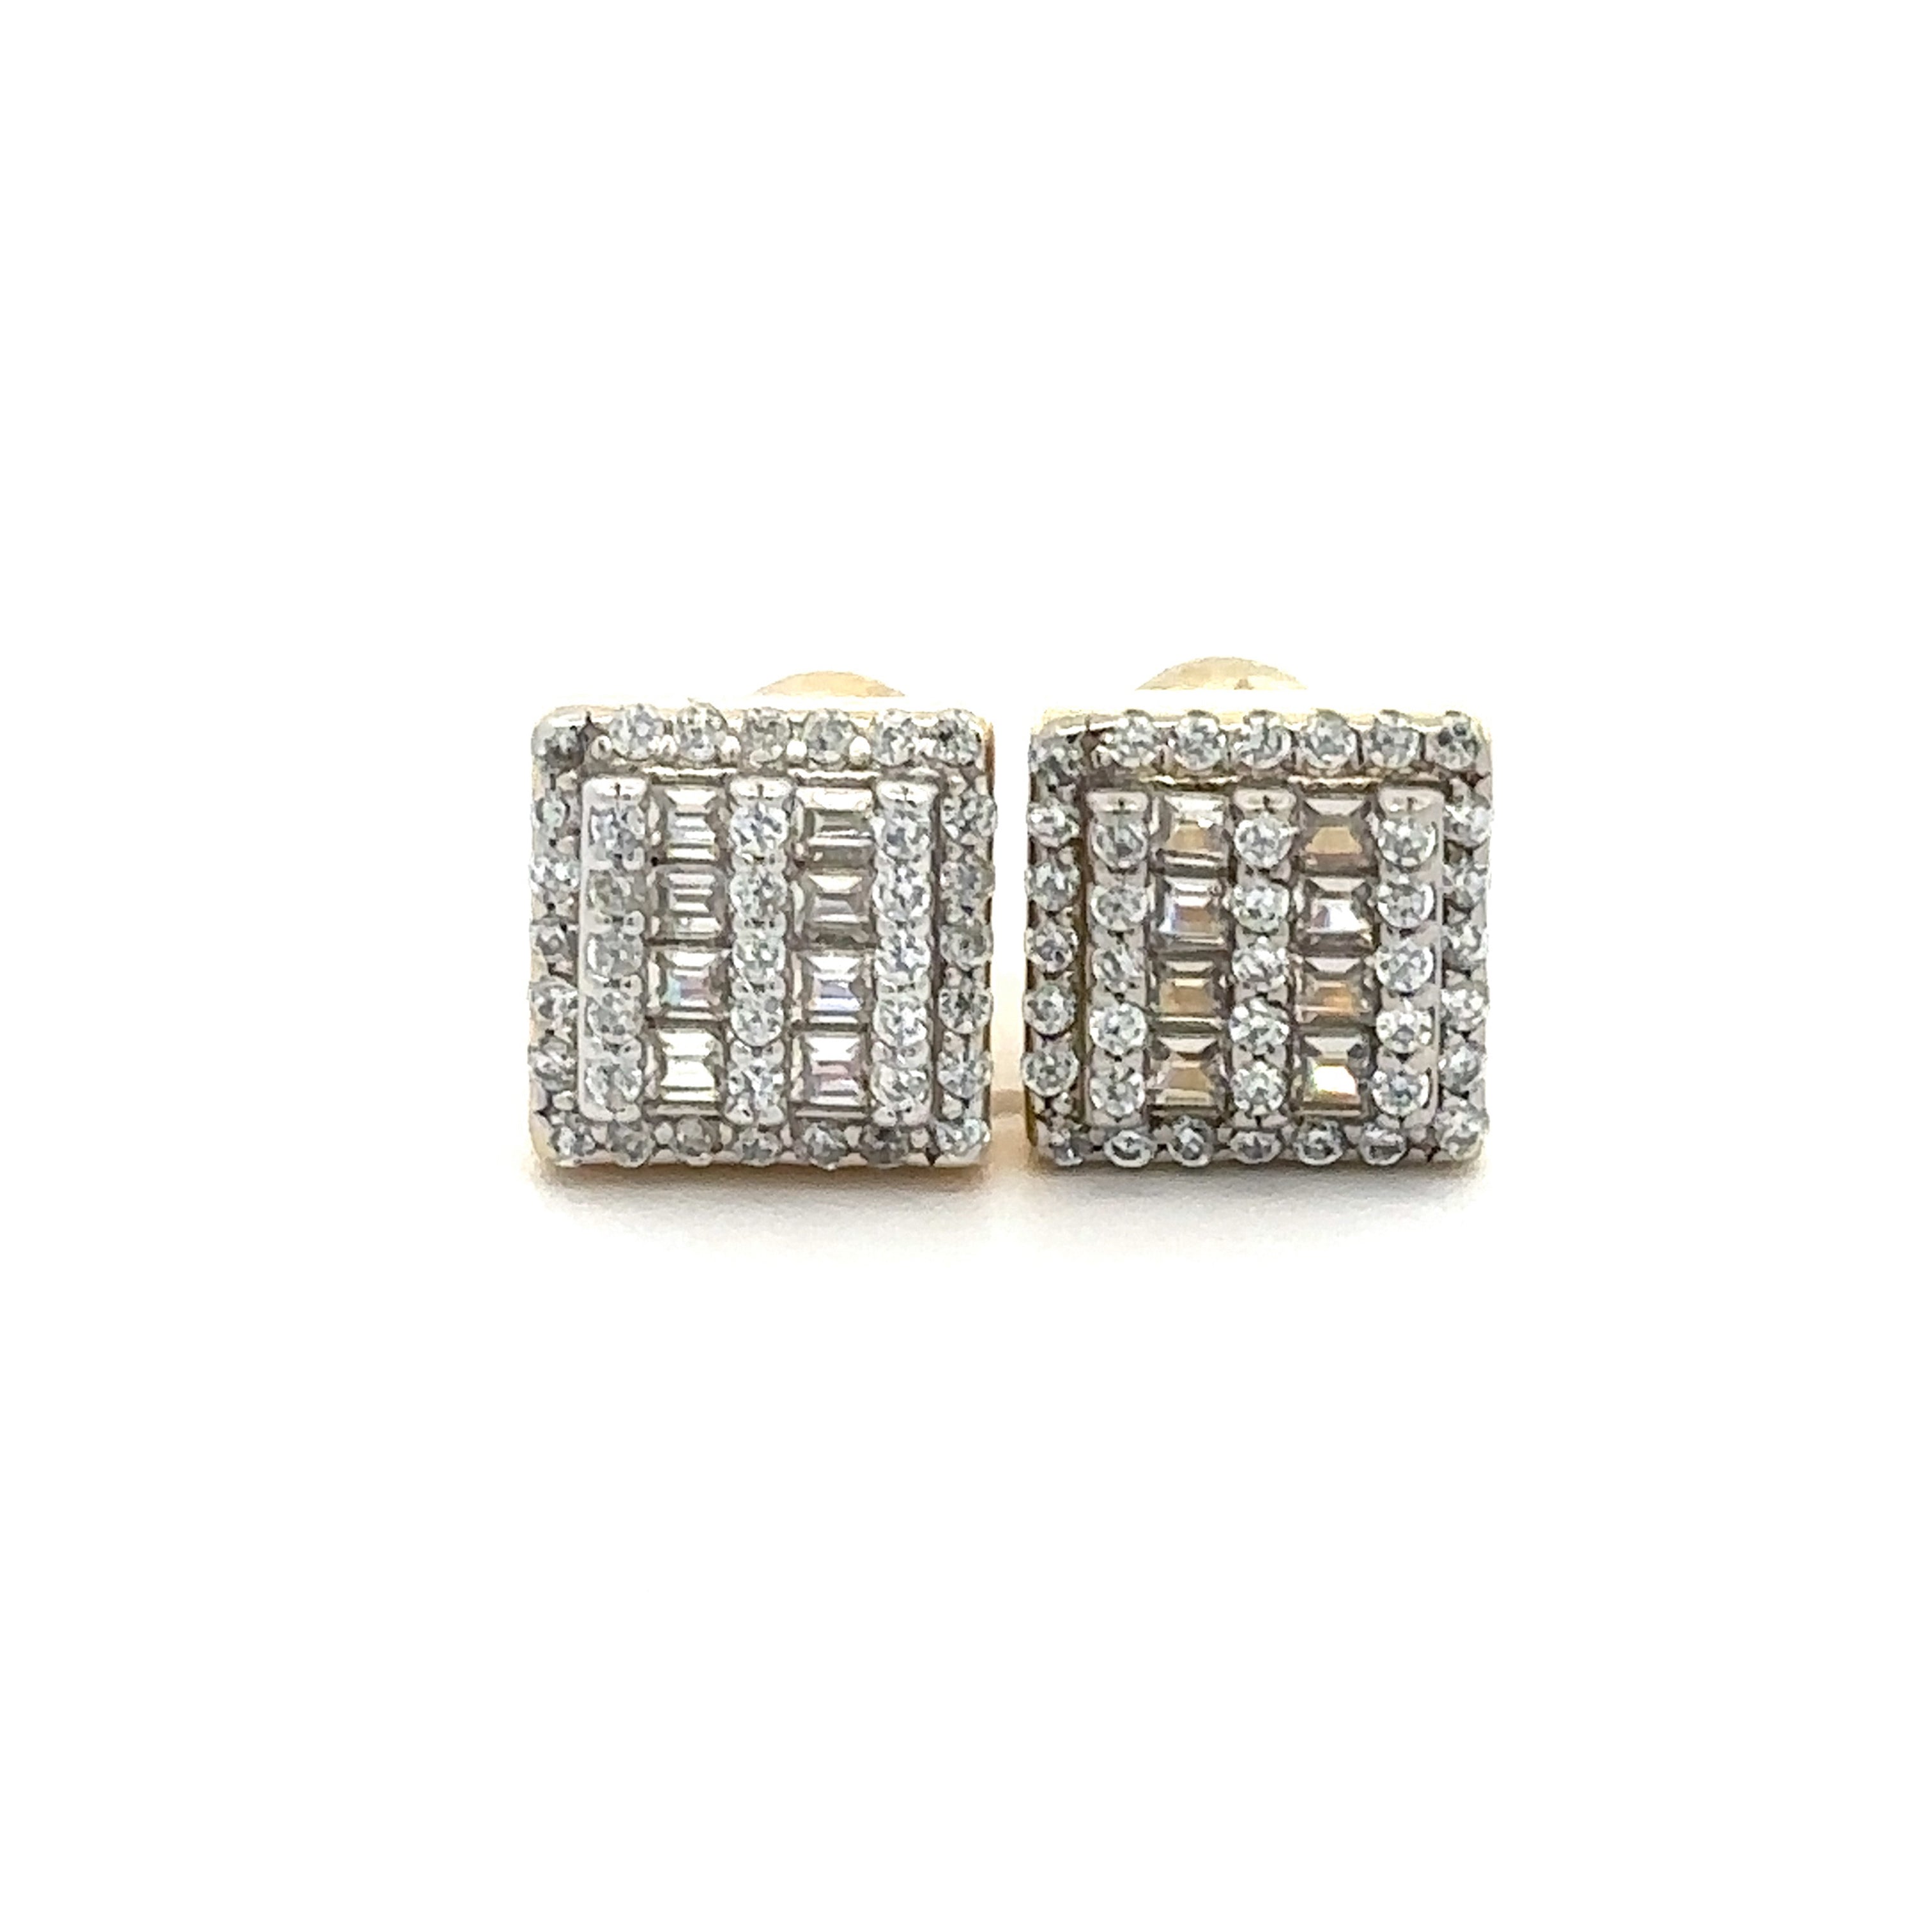 CAELUM 925 CZ GOLD ICED OUT EARRINGS | 9219632